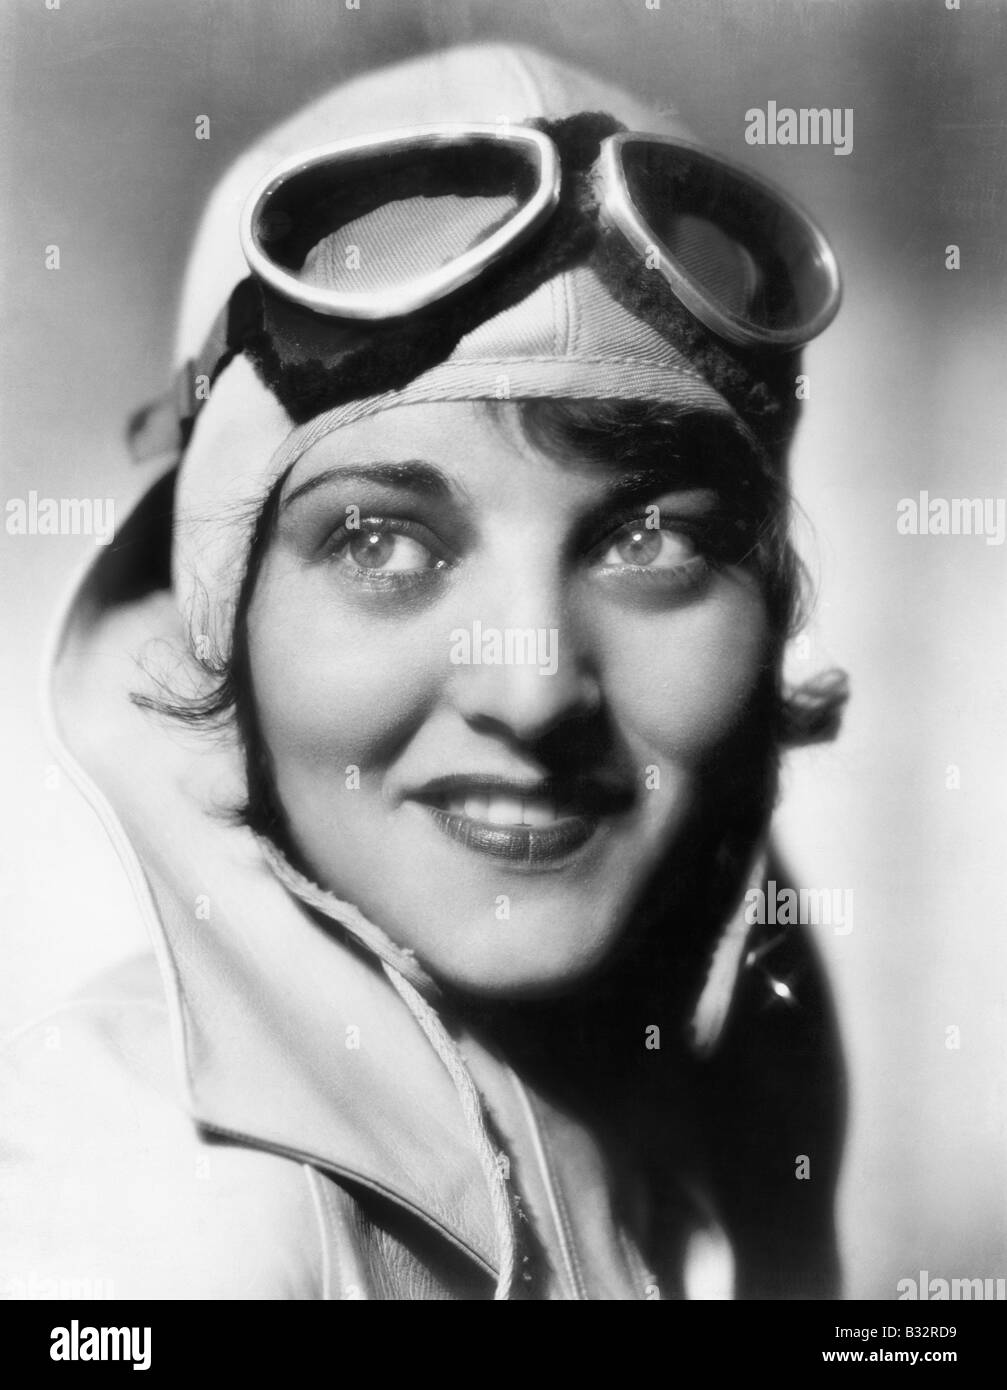 Woman with a pilots hat and goggles Stock Photo